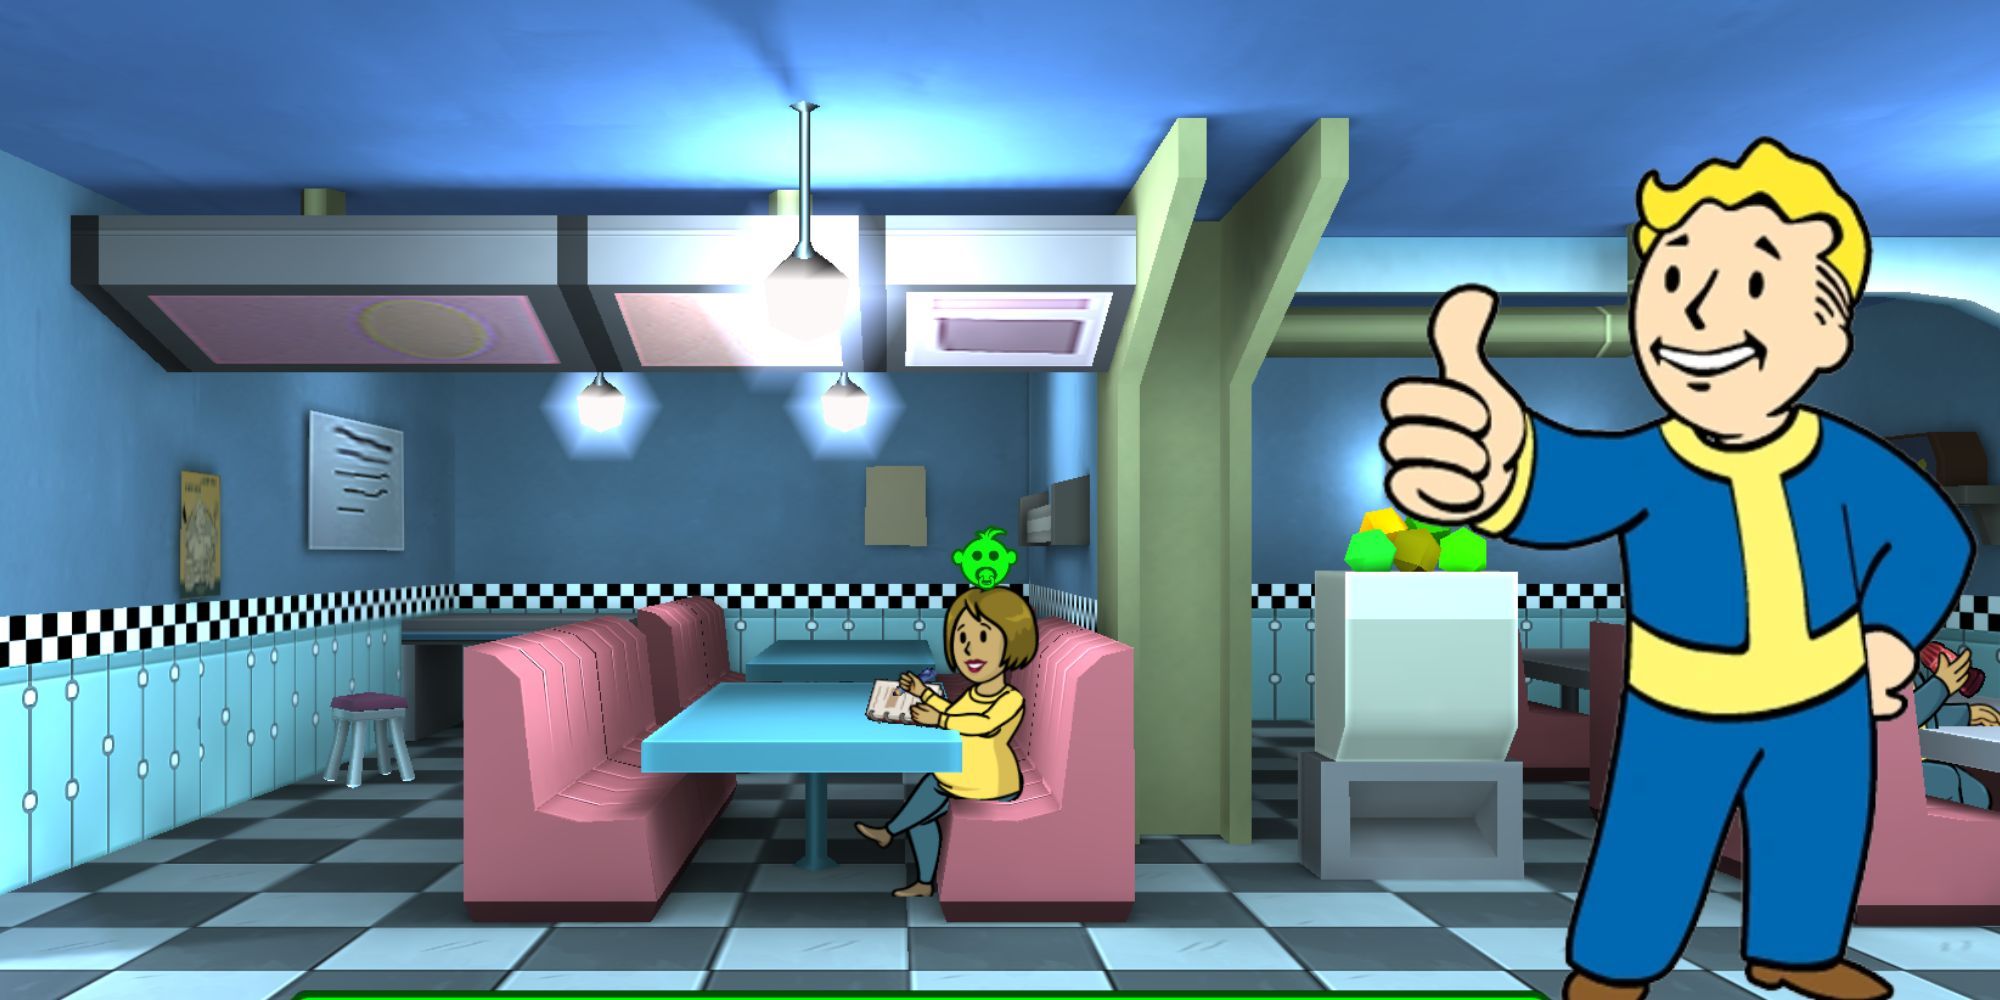 Fallout Shelter: An image of a pregnant Dweller in the Diner and Vault Boy giving a thumbs up.